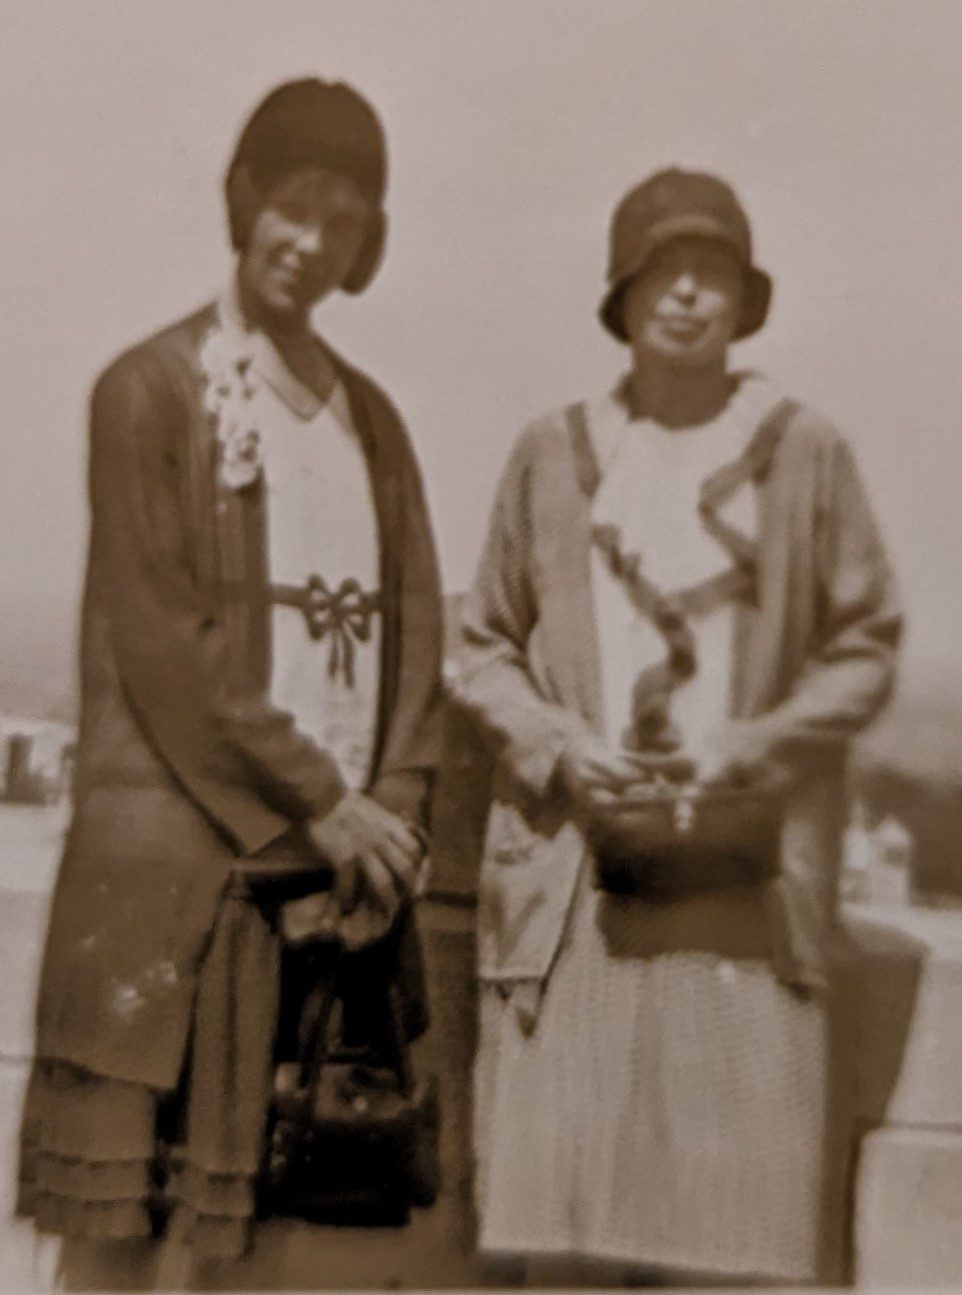 A sepia-toned photograph of two women.